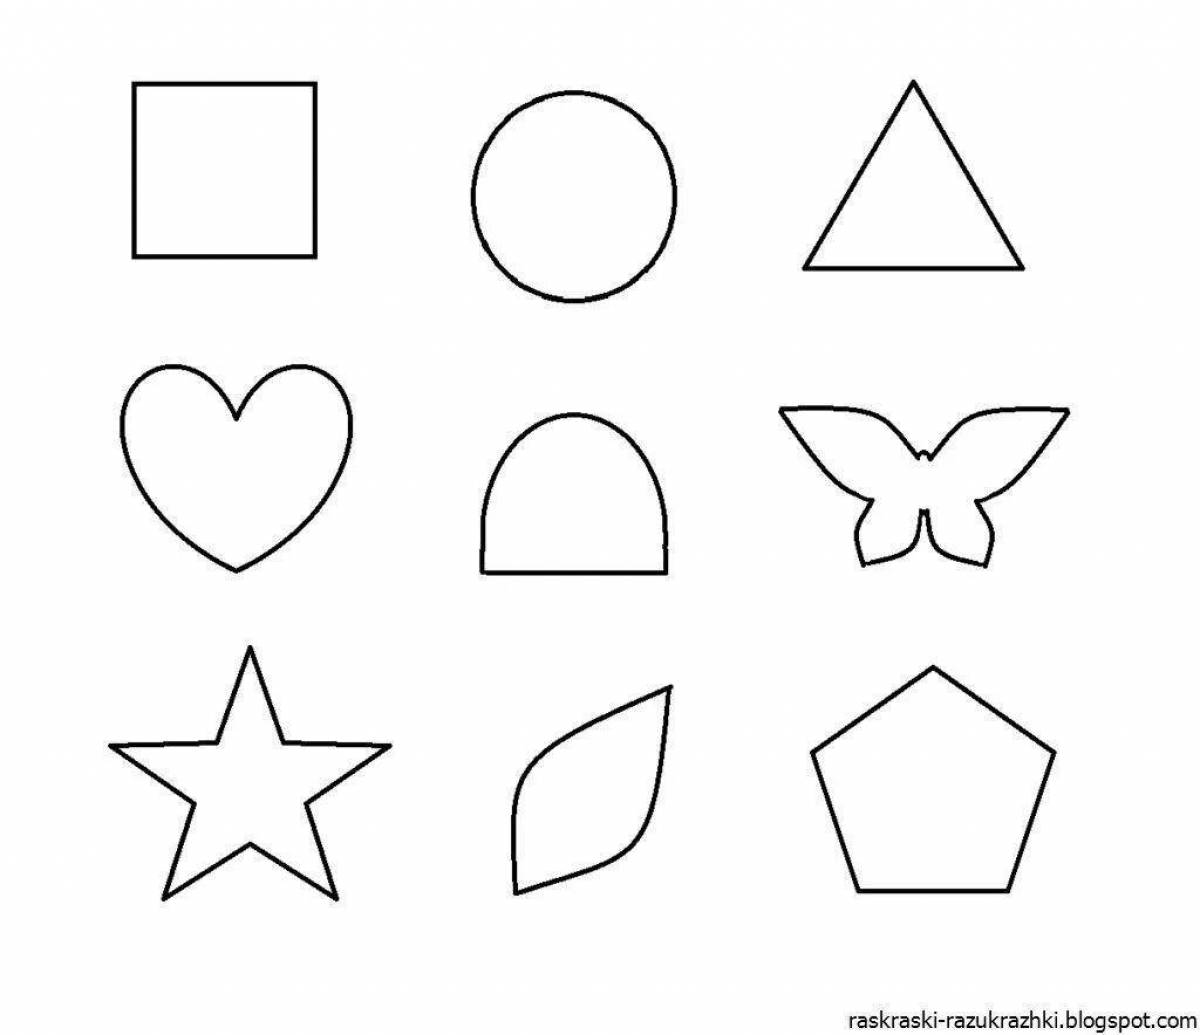 A fun coloring book for kids with geometric shapes